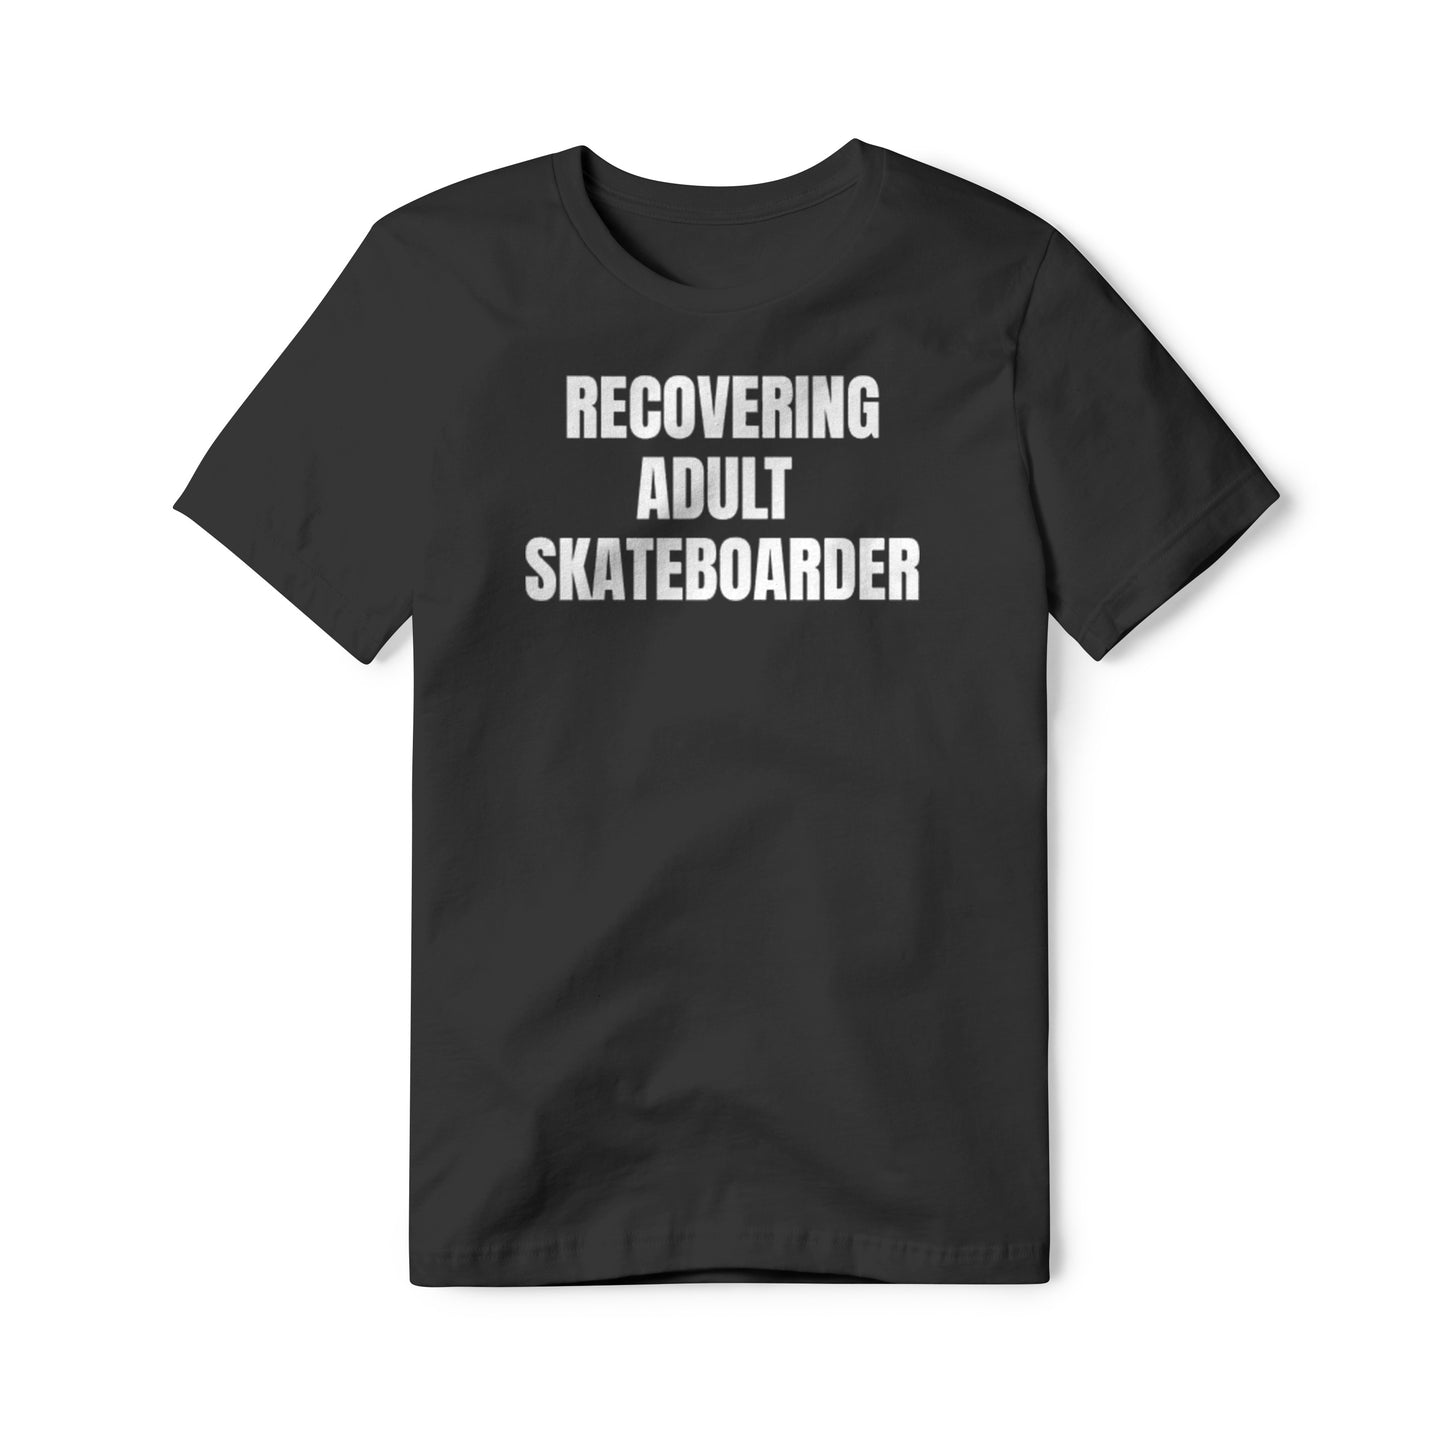 Recovering Adult Skateboarder T-Shirt